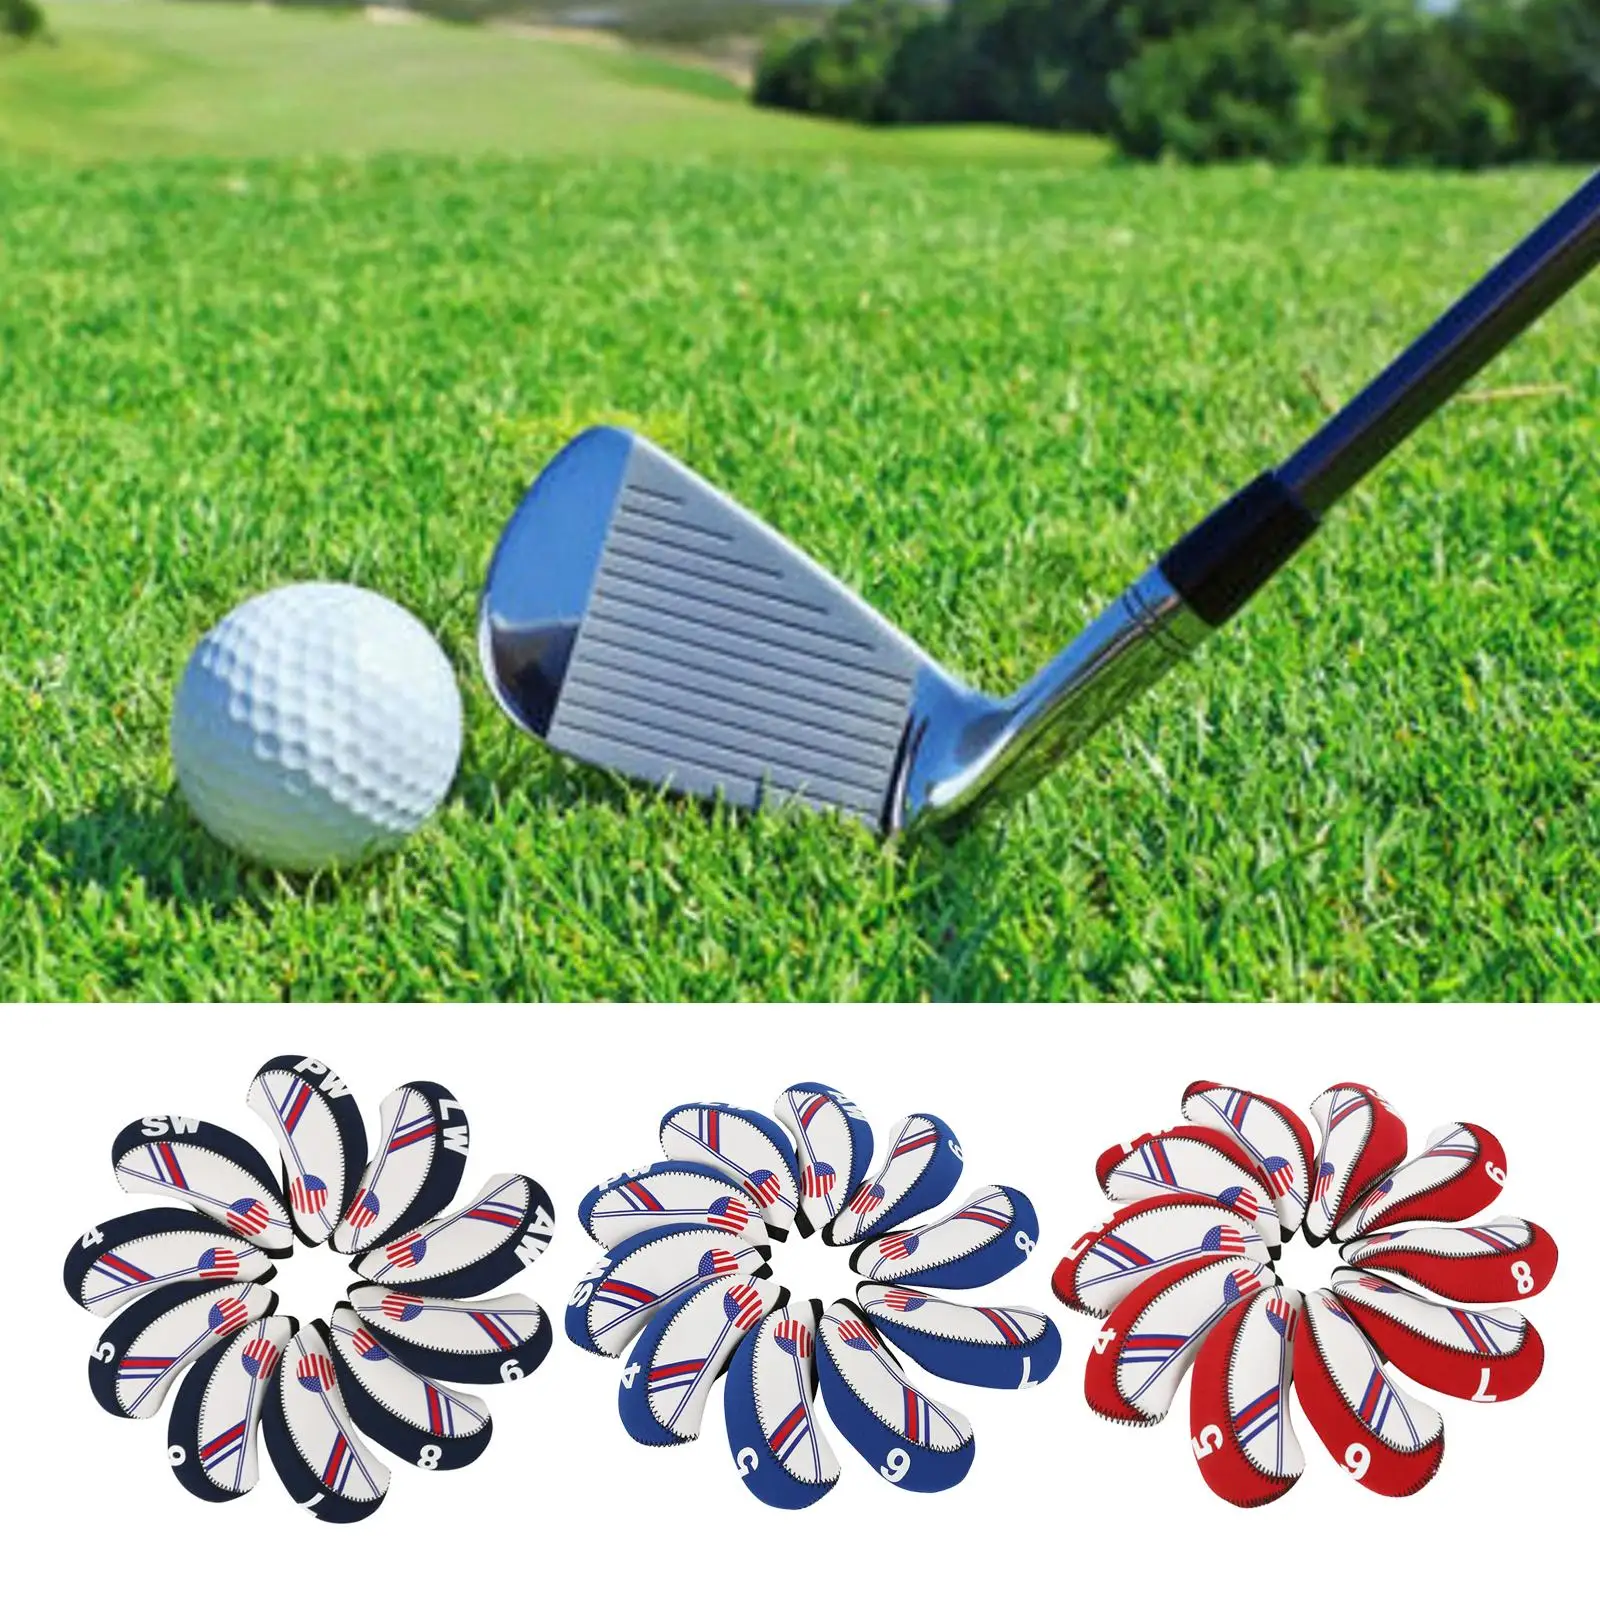 10Pcs Golf Iron Headcover Golf Club Head Cover W/ Number Protection Guard